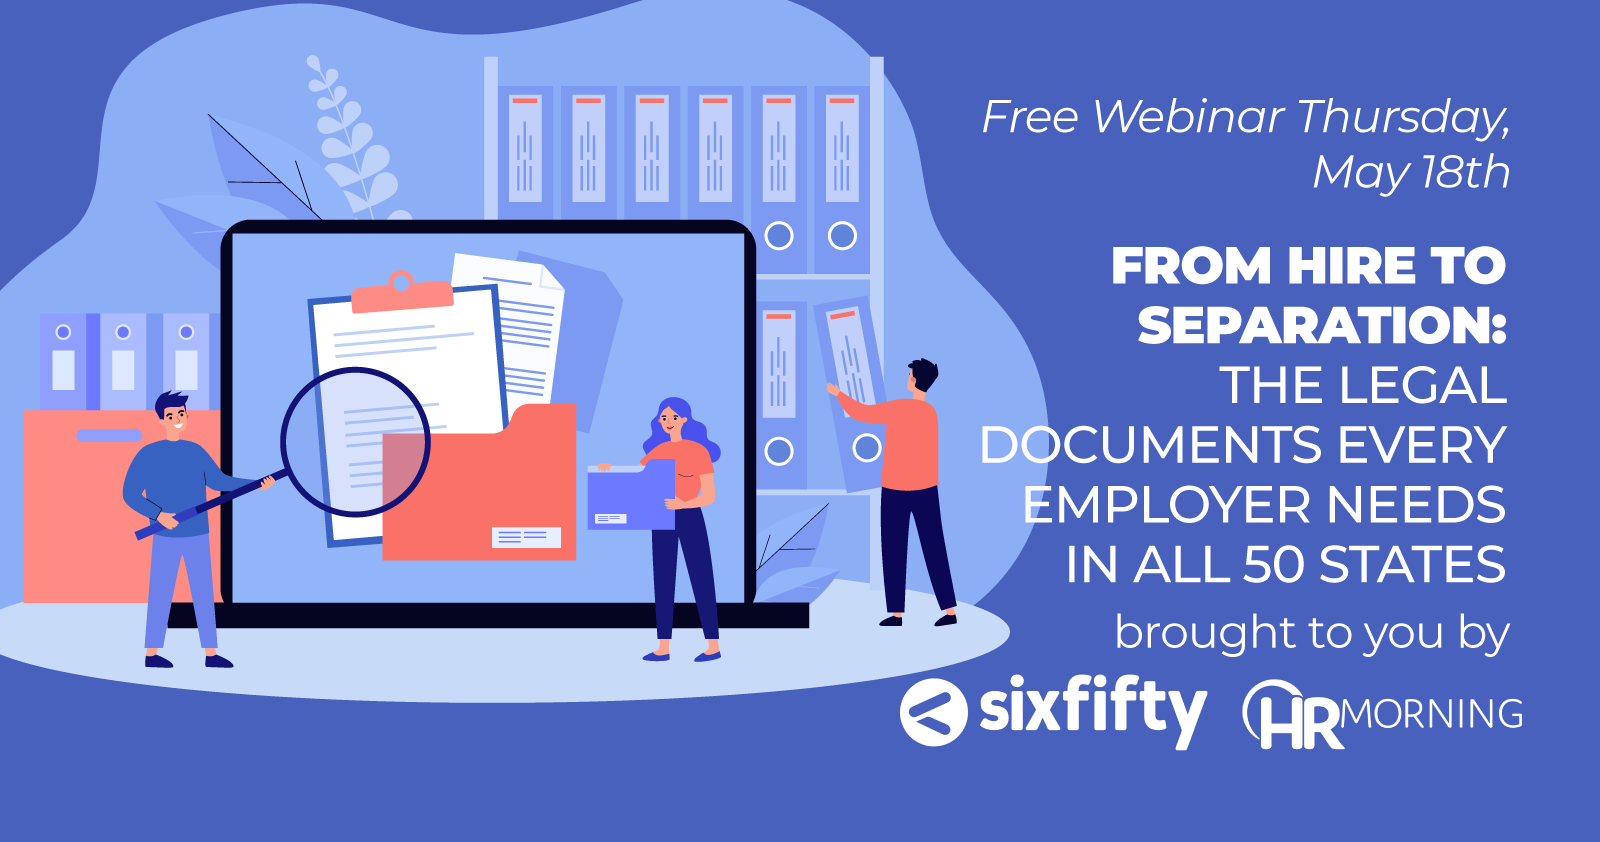 Free Webinar Thursday, May 18th From Hire to Separation: The Legal Documents Every Employer Needs in All 50 States brought to you by *sixfifty-Logo* *HRMorning Logo*